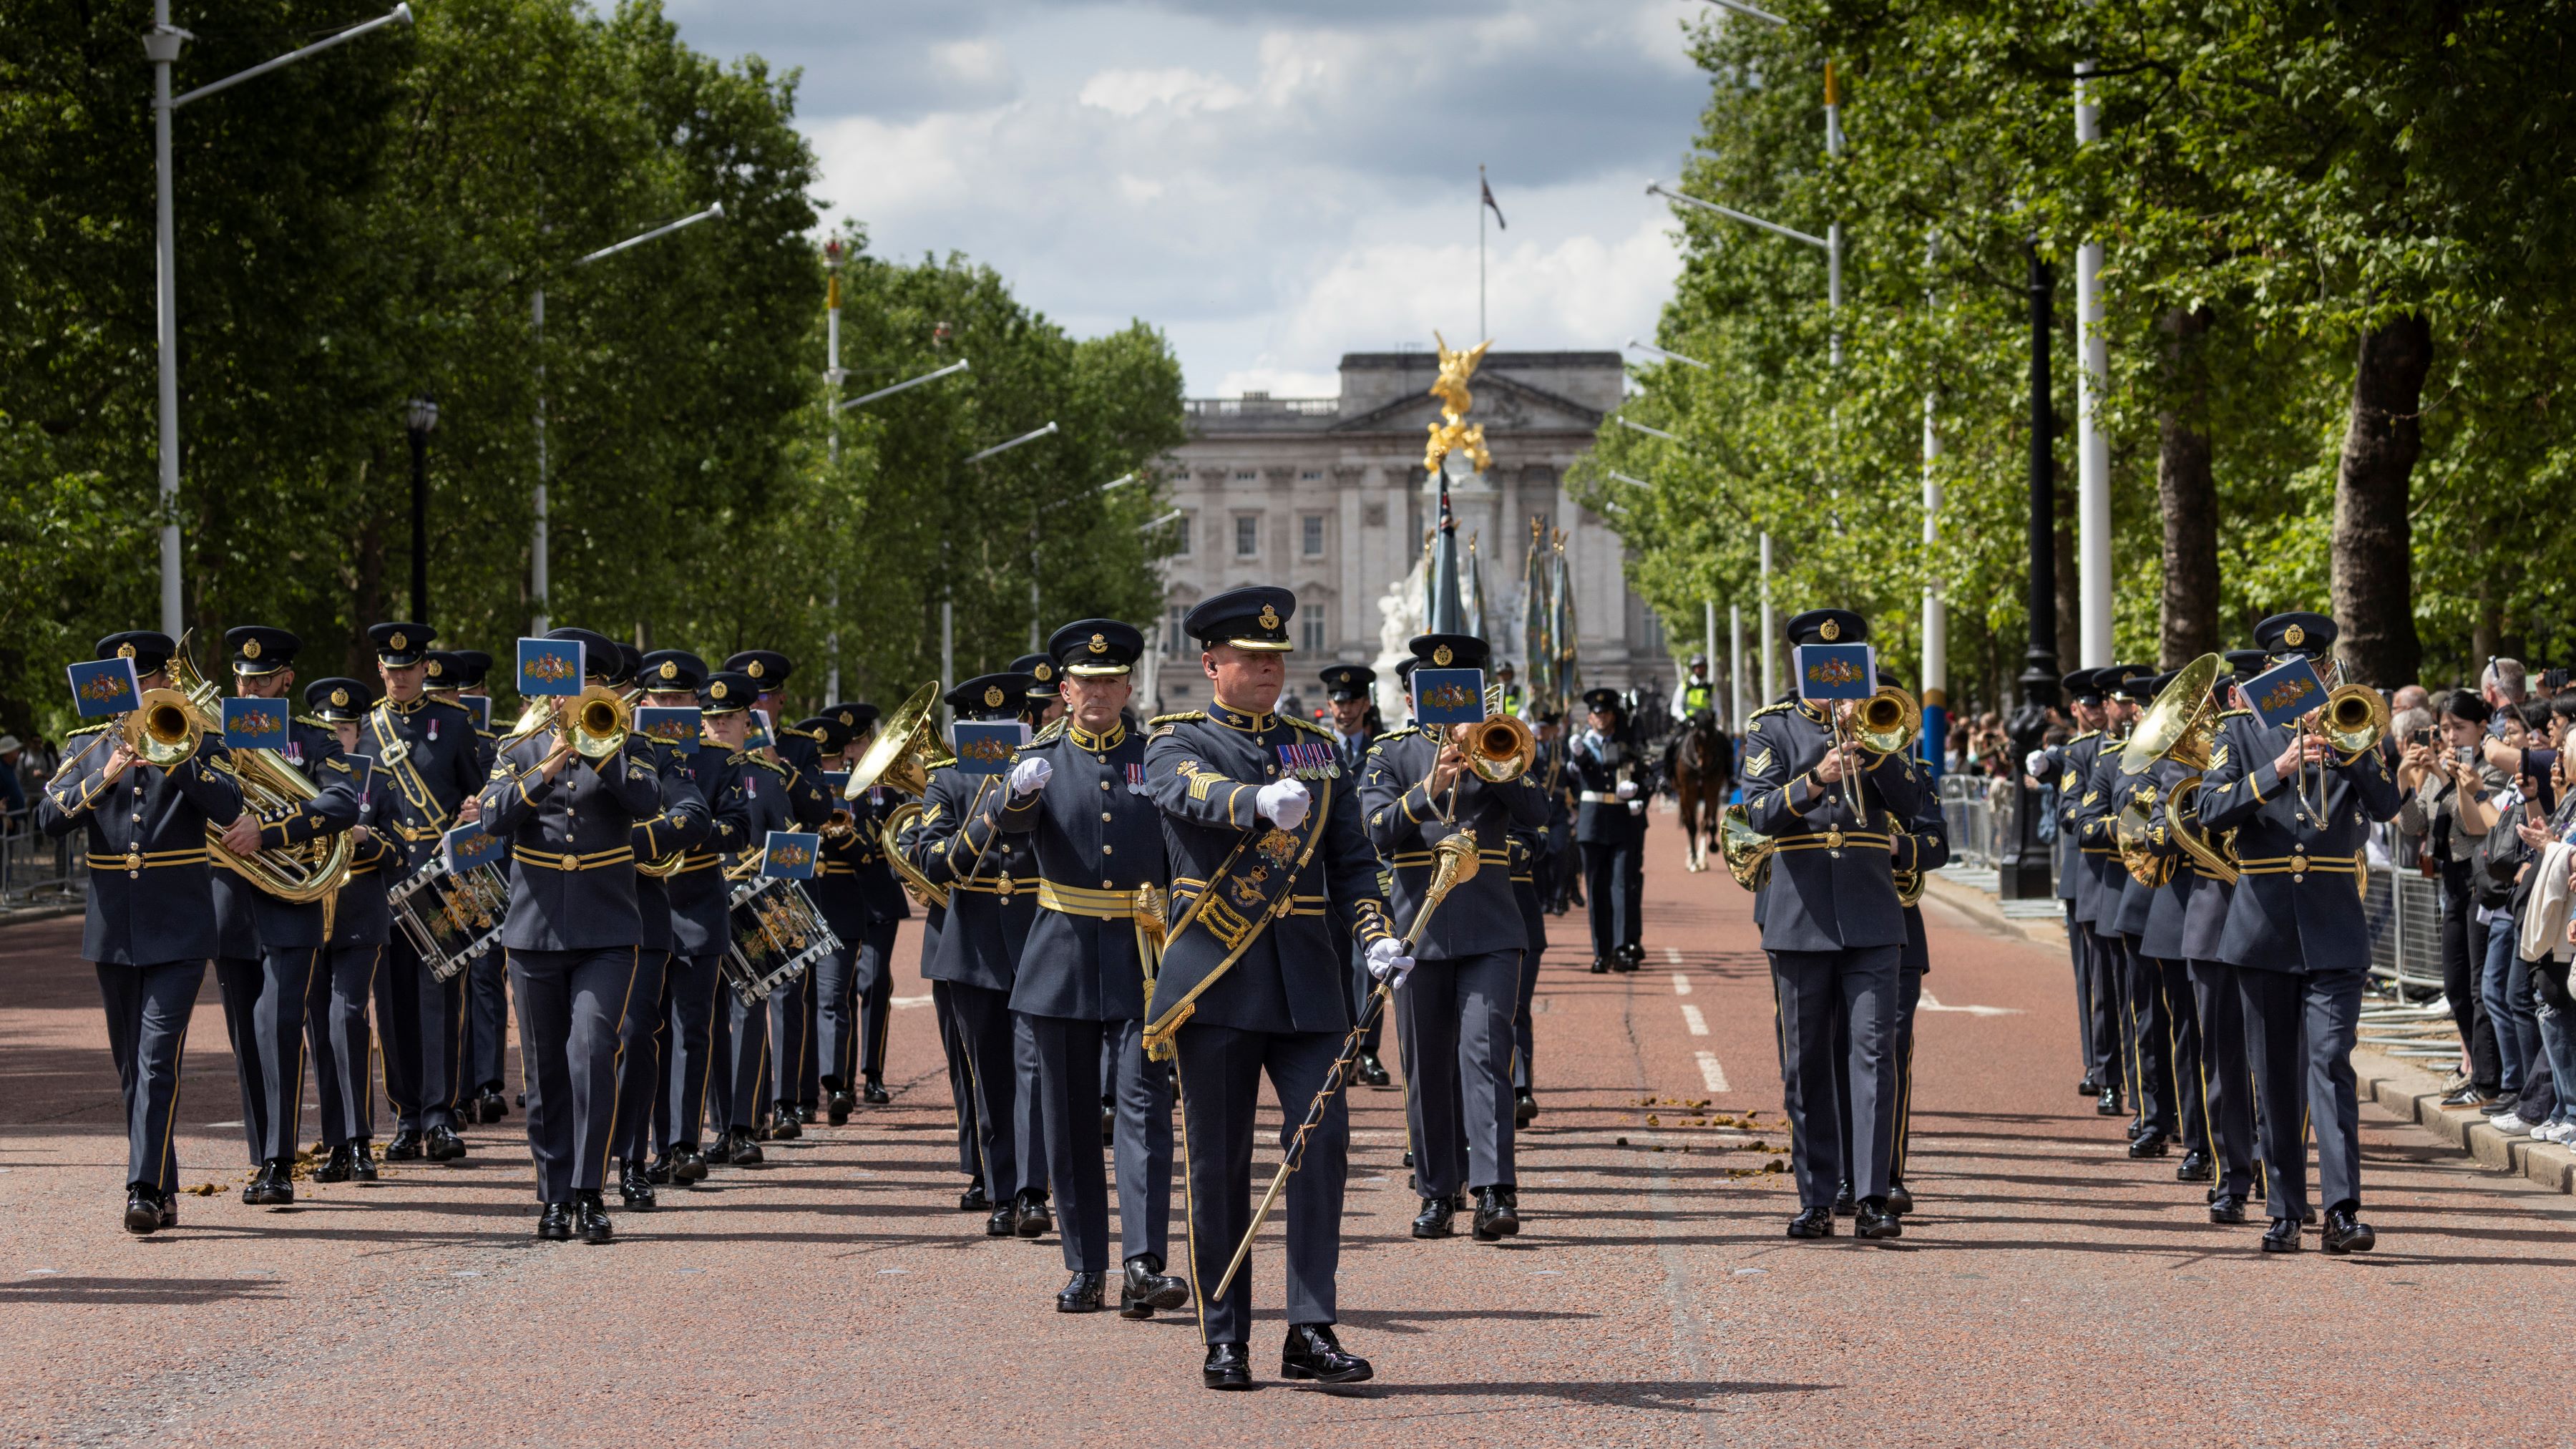 The Band of the Royal Auxiliary Air Force from RAF Cranwell.